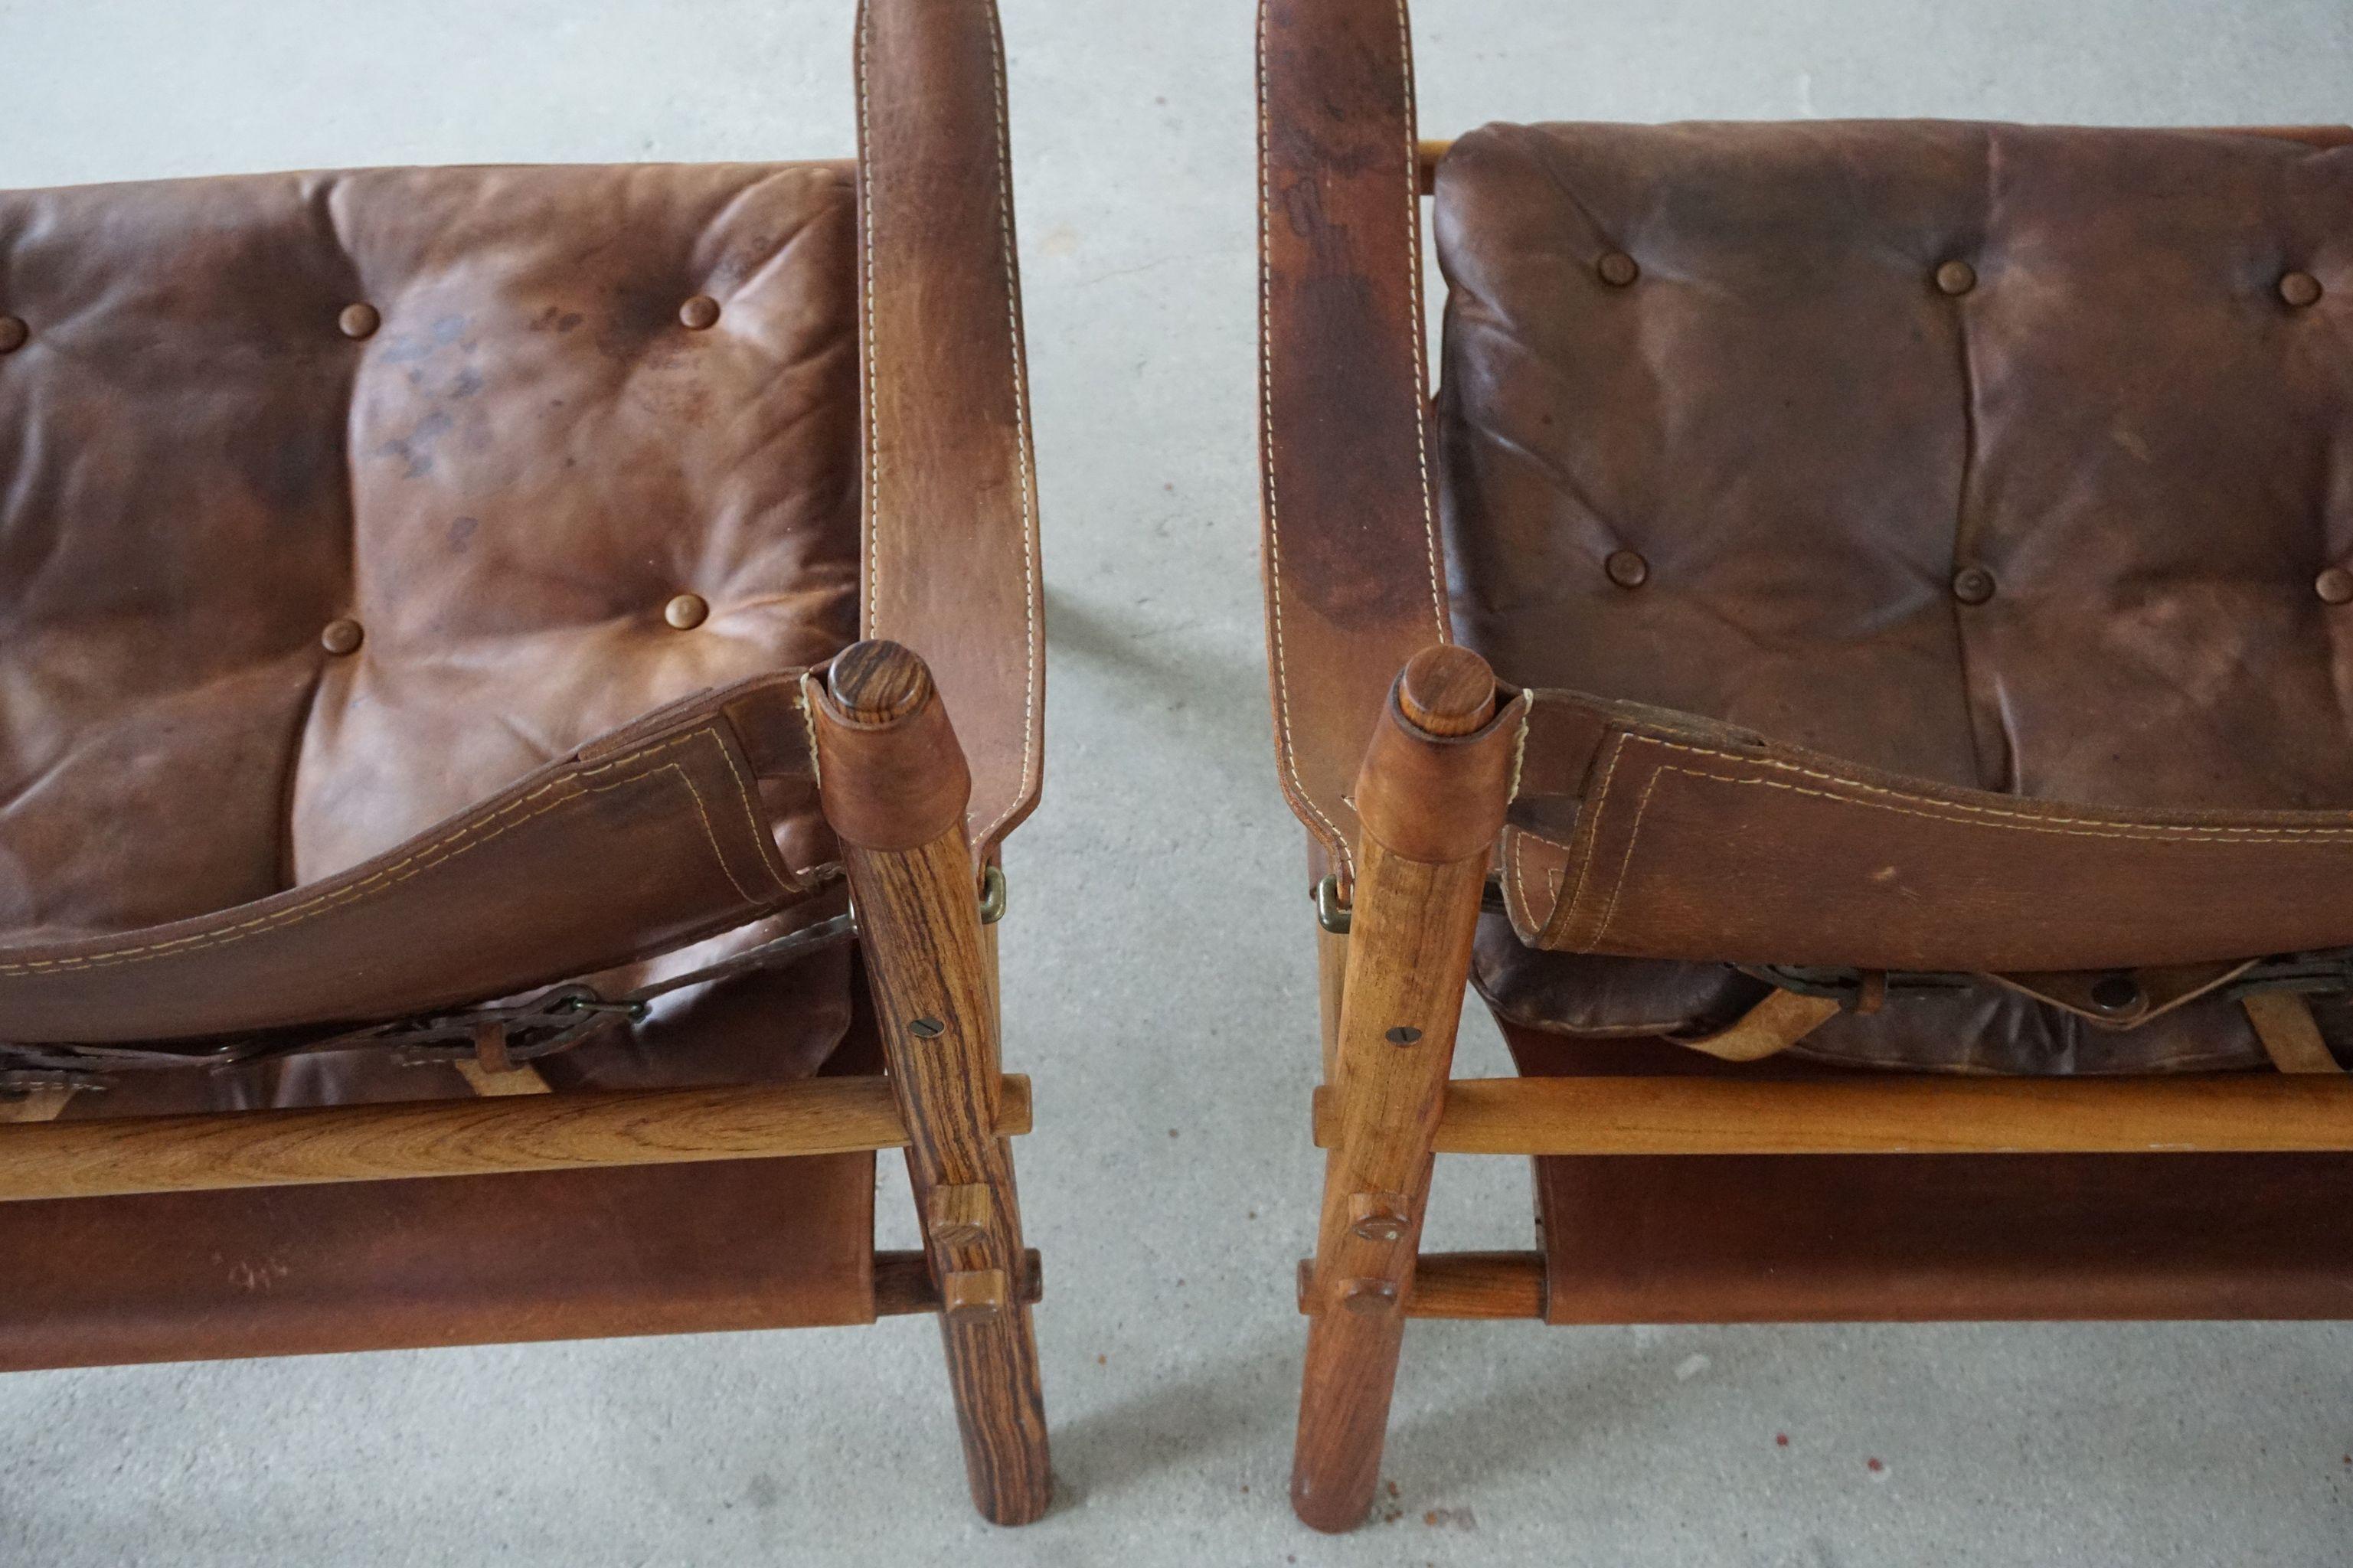 Mid-20th Century Pair of Sirocco Safari Chairs, Made by Arne Norell AB in Aneby Sweden, 1960s